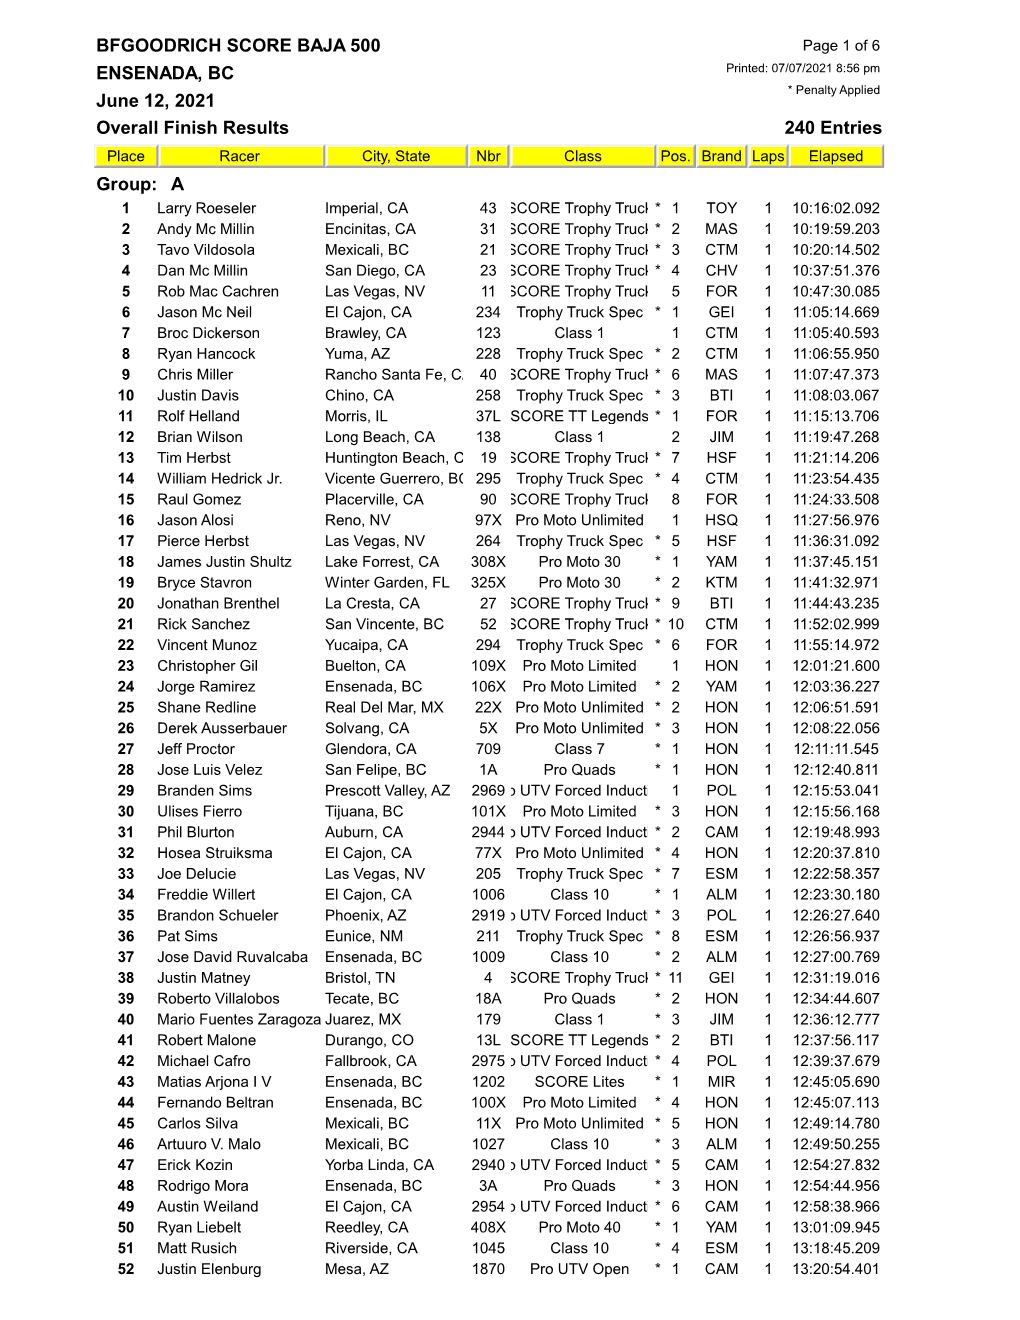 Overall Finish Results 240 Entries Place Racer City, State Nbr Class Pos